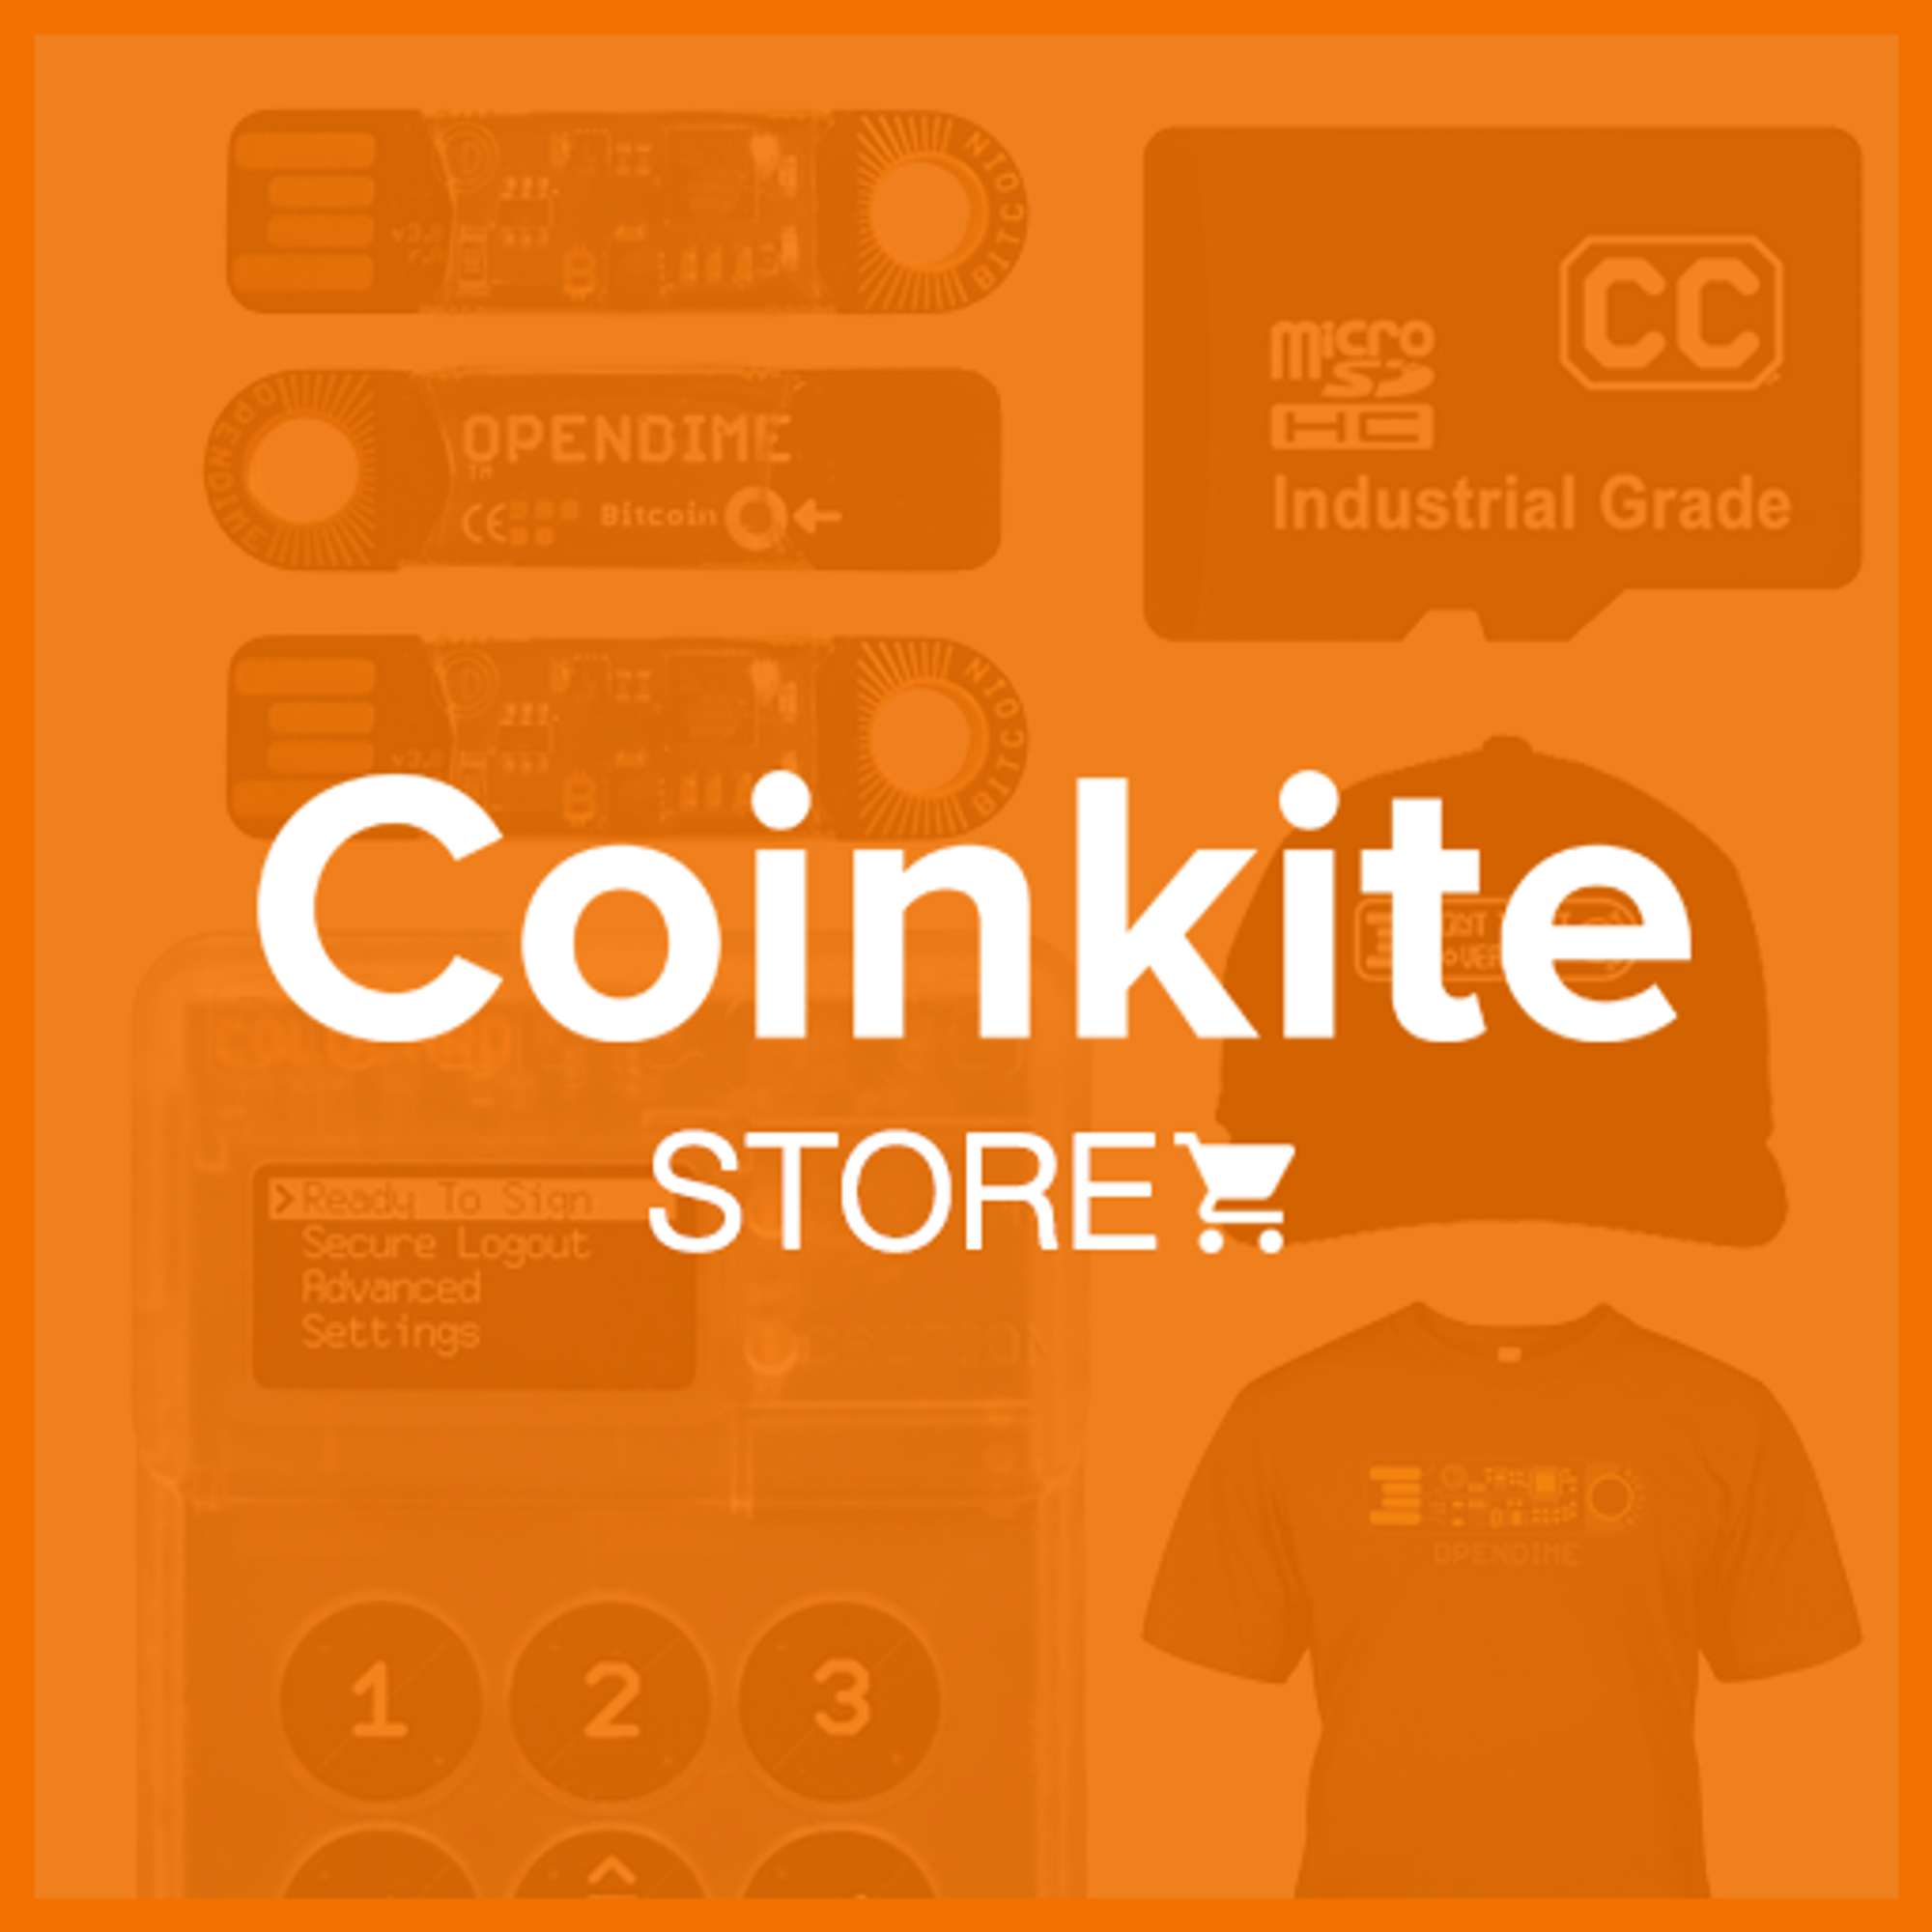 Coinkite Store - Get your Coinkite, Opendime and Coldcard product here!